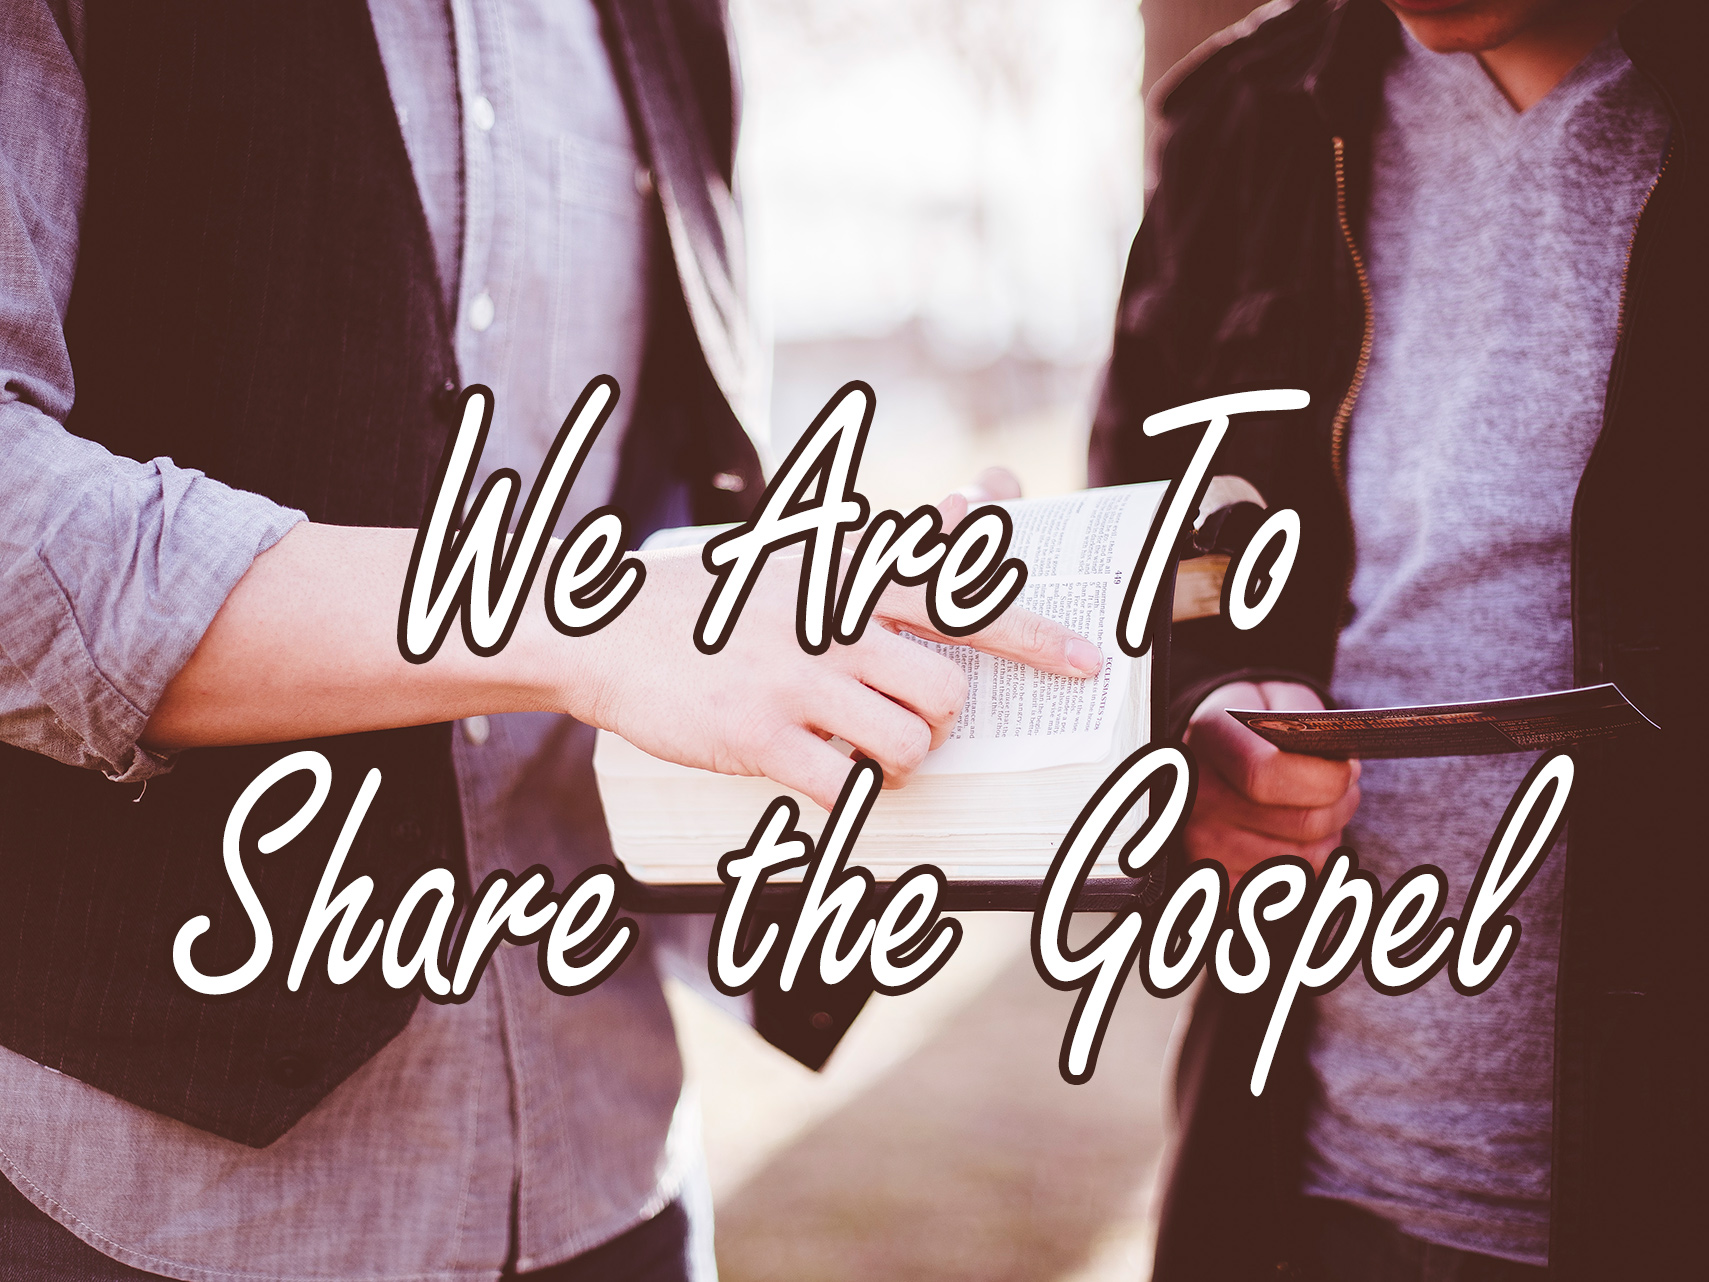 Reaching People for Jesus - We Are To Share the Gospel